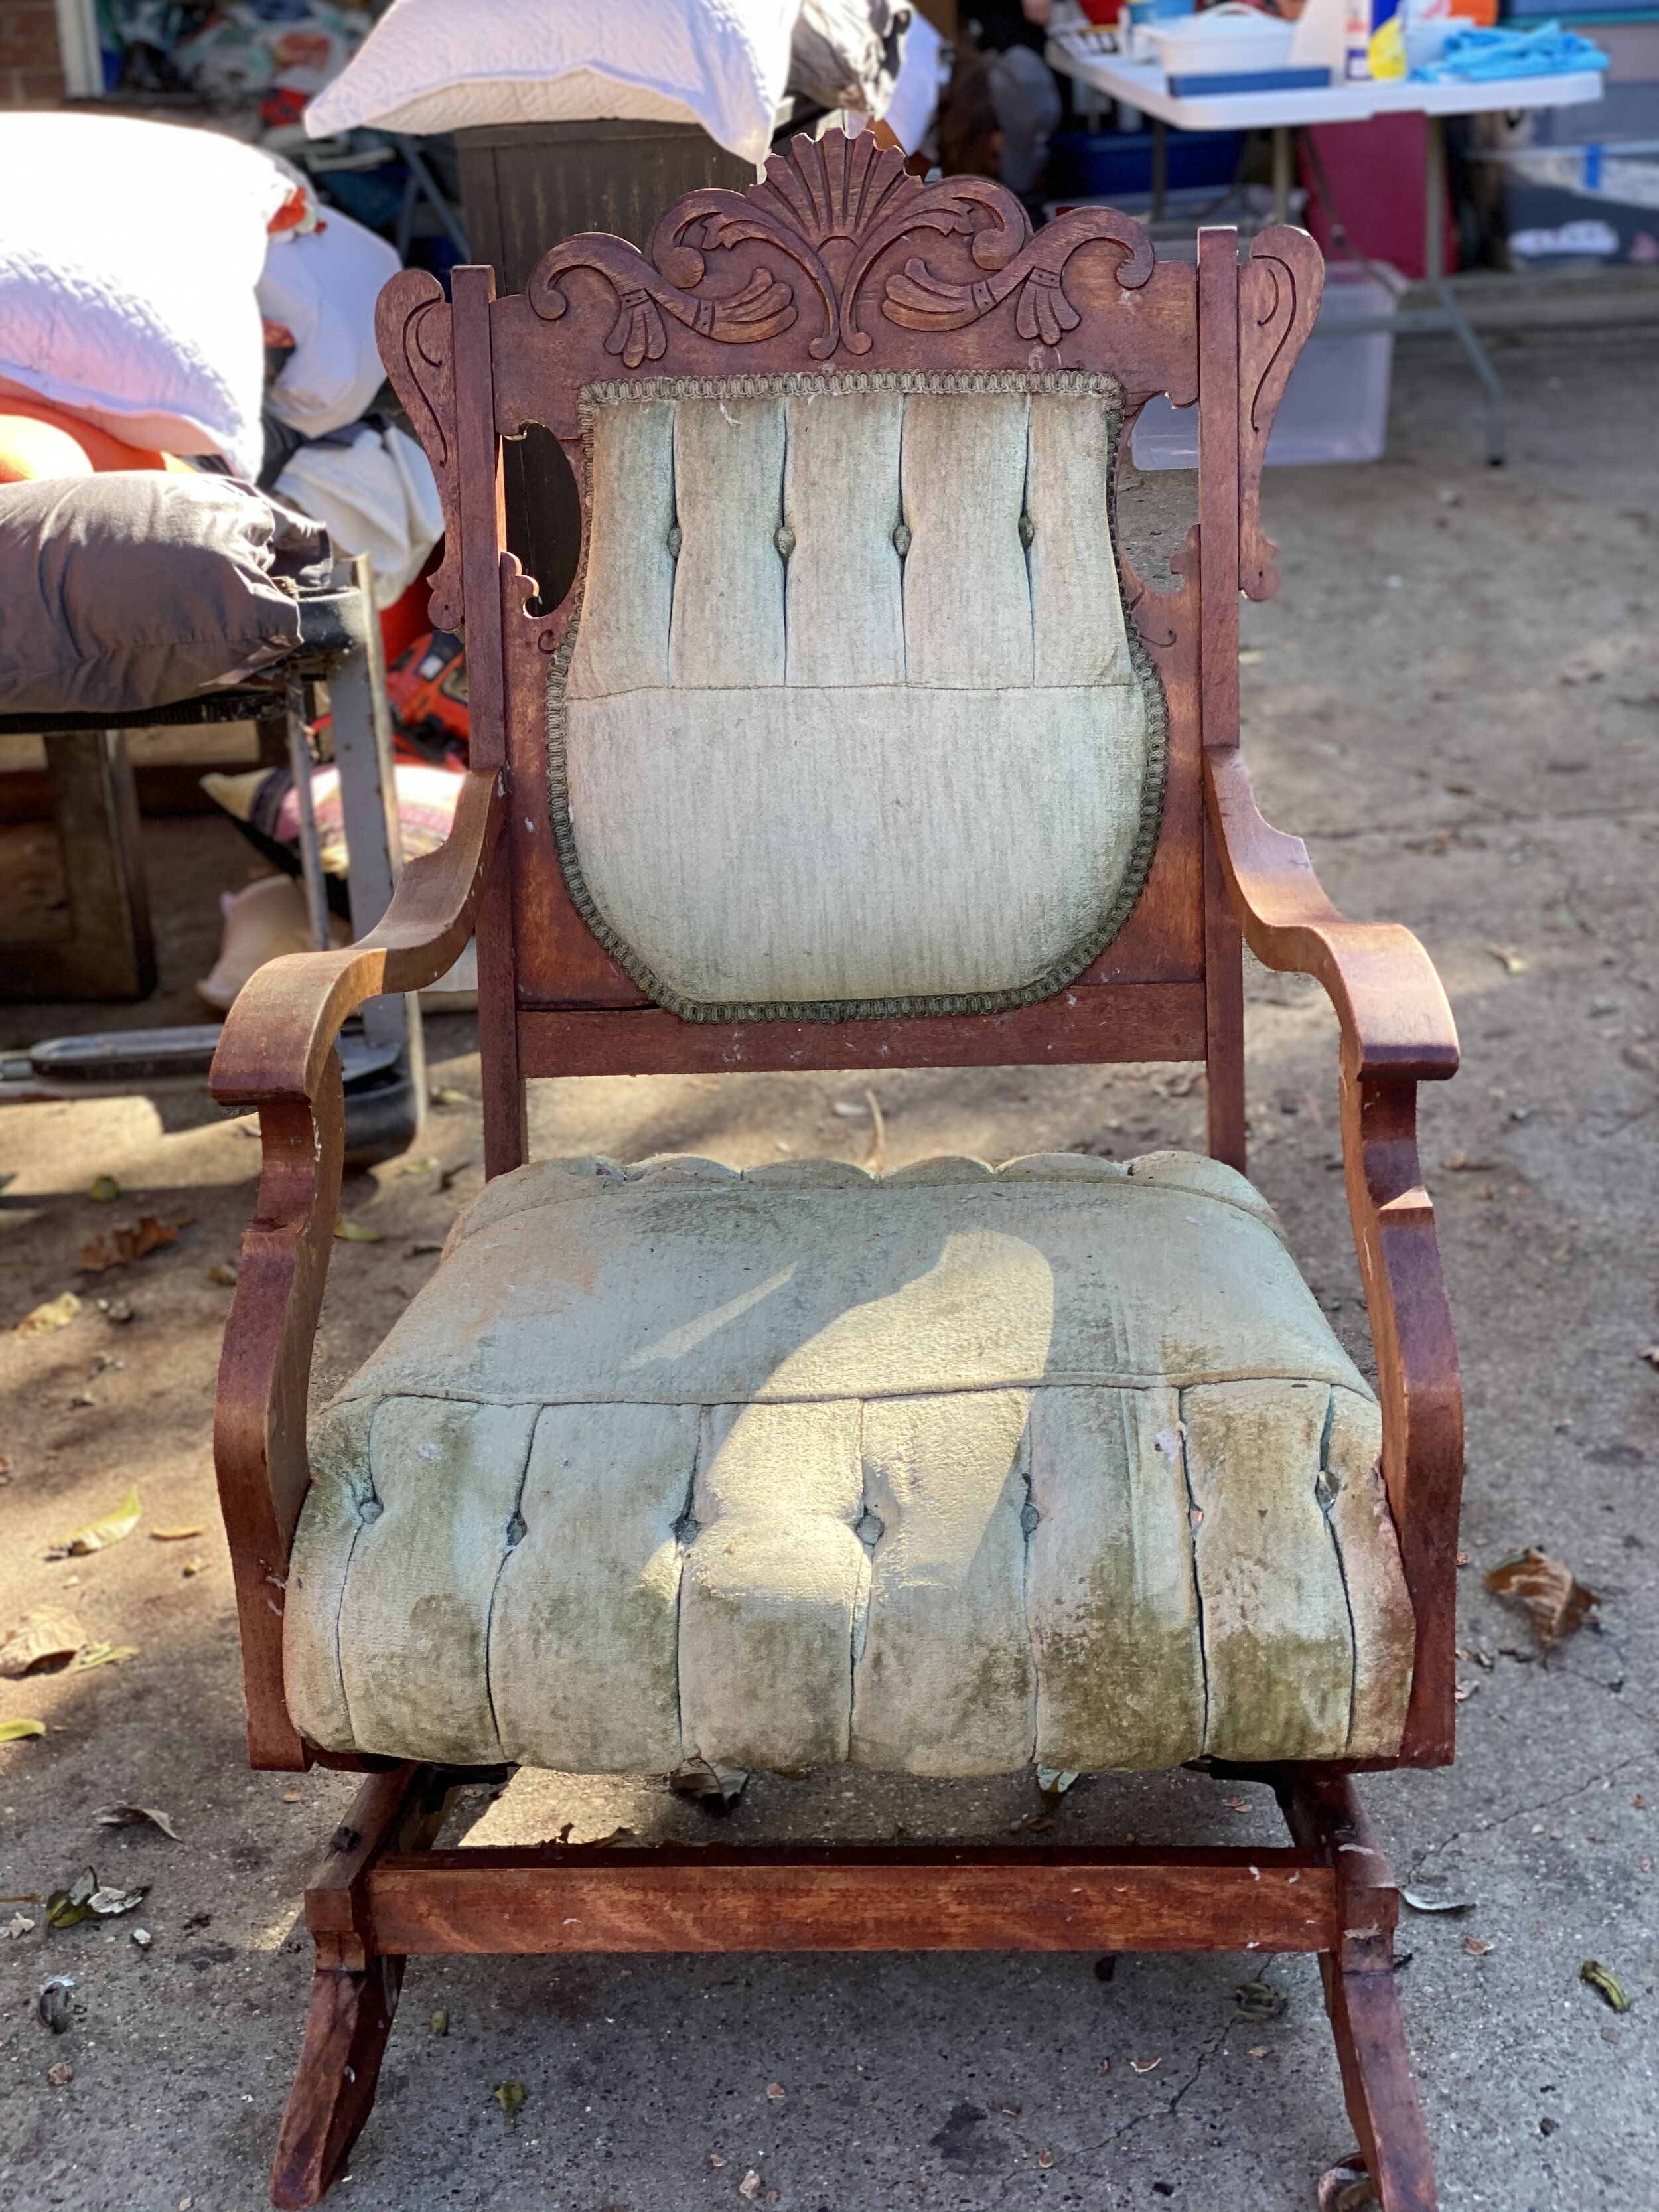  This rocking chair is over 100 years old and belonged to Elizabeth's great, great Aunt Sarah. It was pulled from the debris and the McCormicks are hopeful it can be restored.    